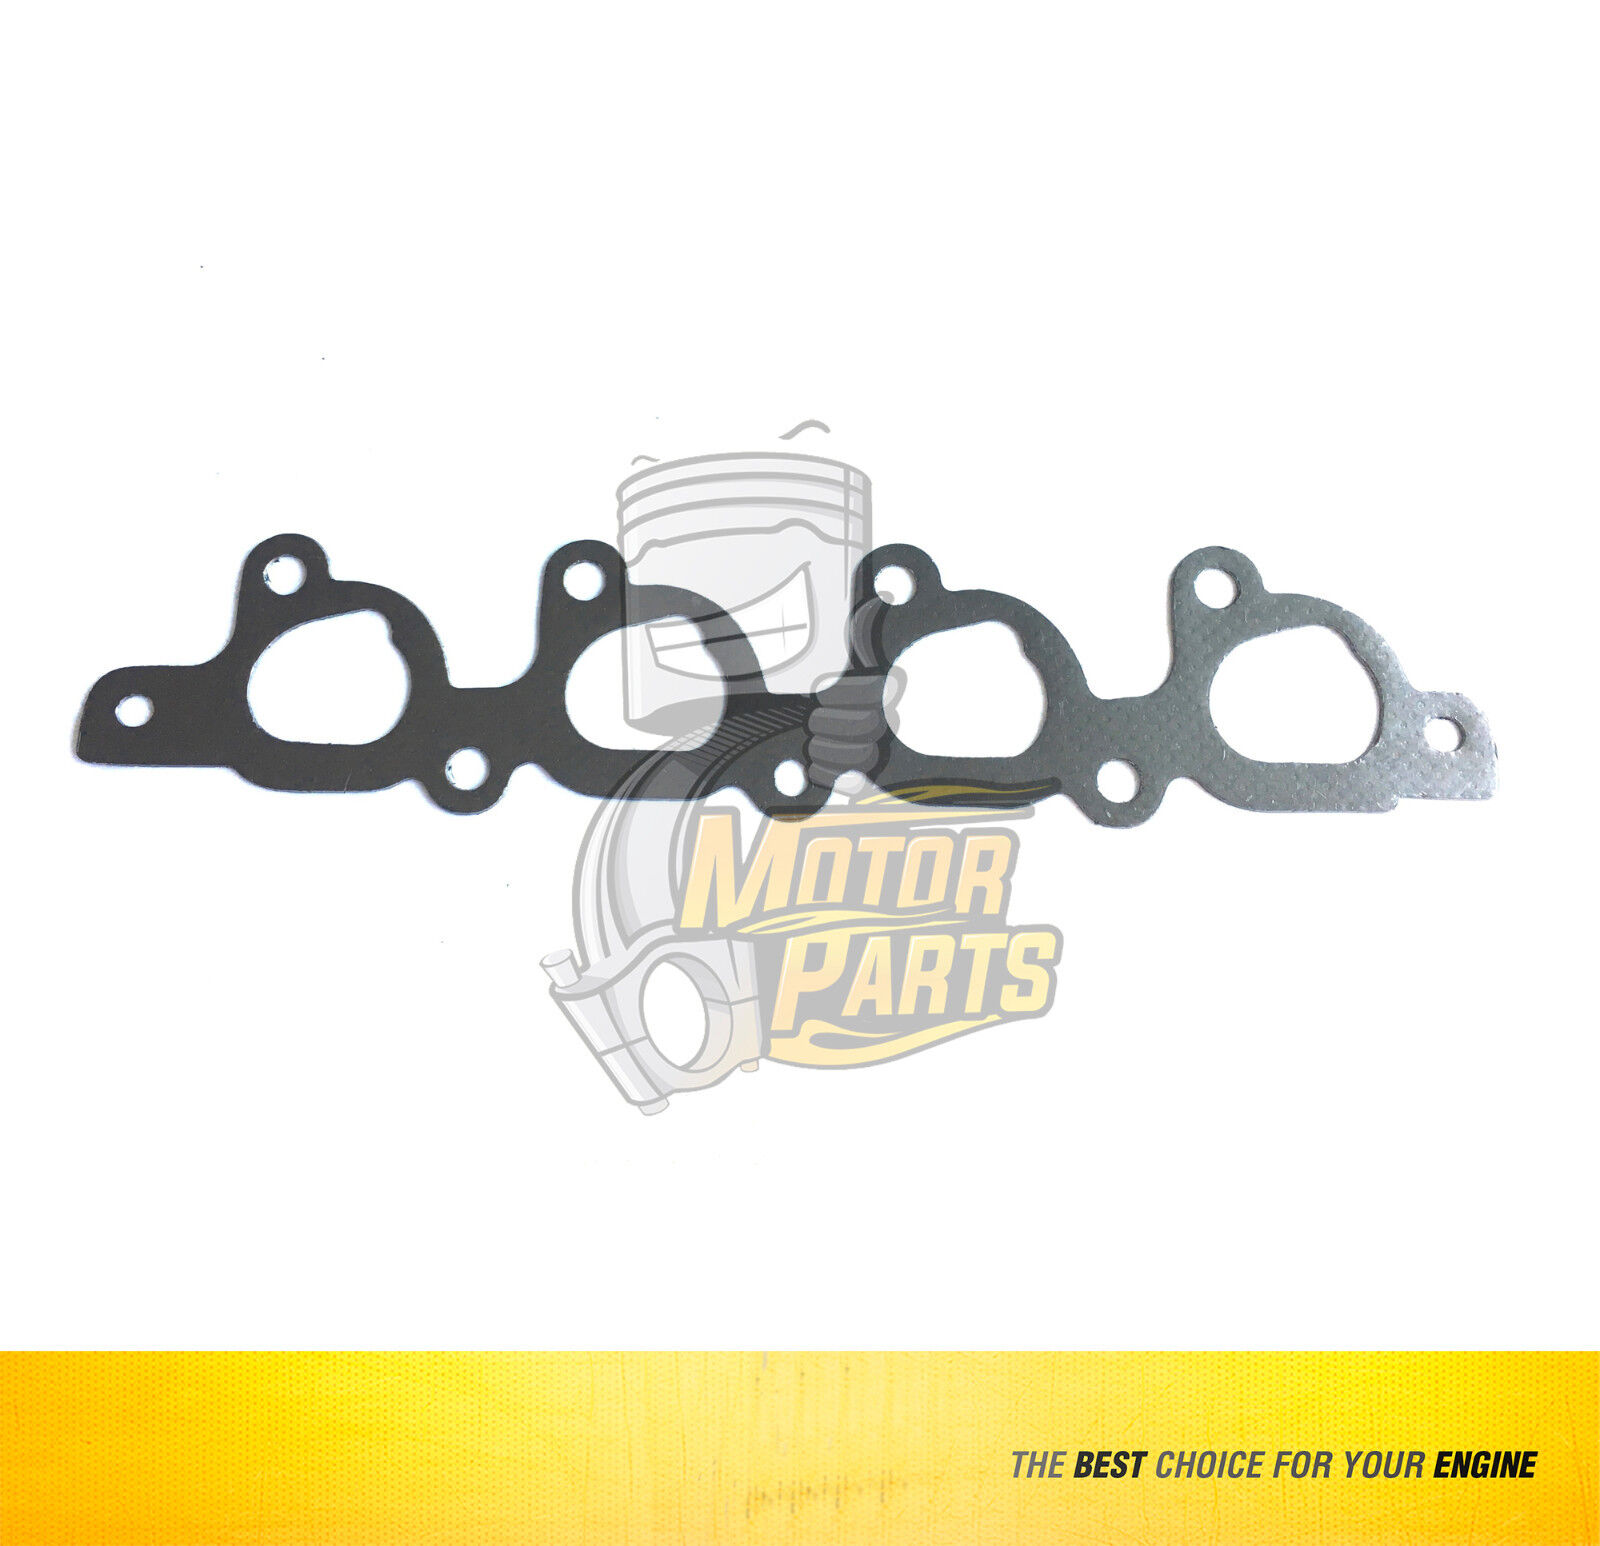 Exhaust Manifold Gaskets for Ford Contour Escort 2.0 L DOHC